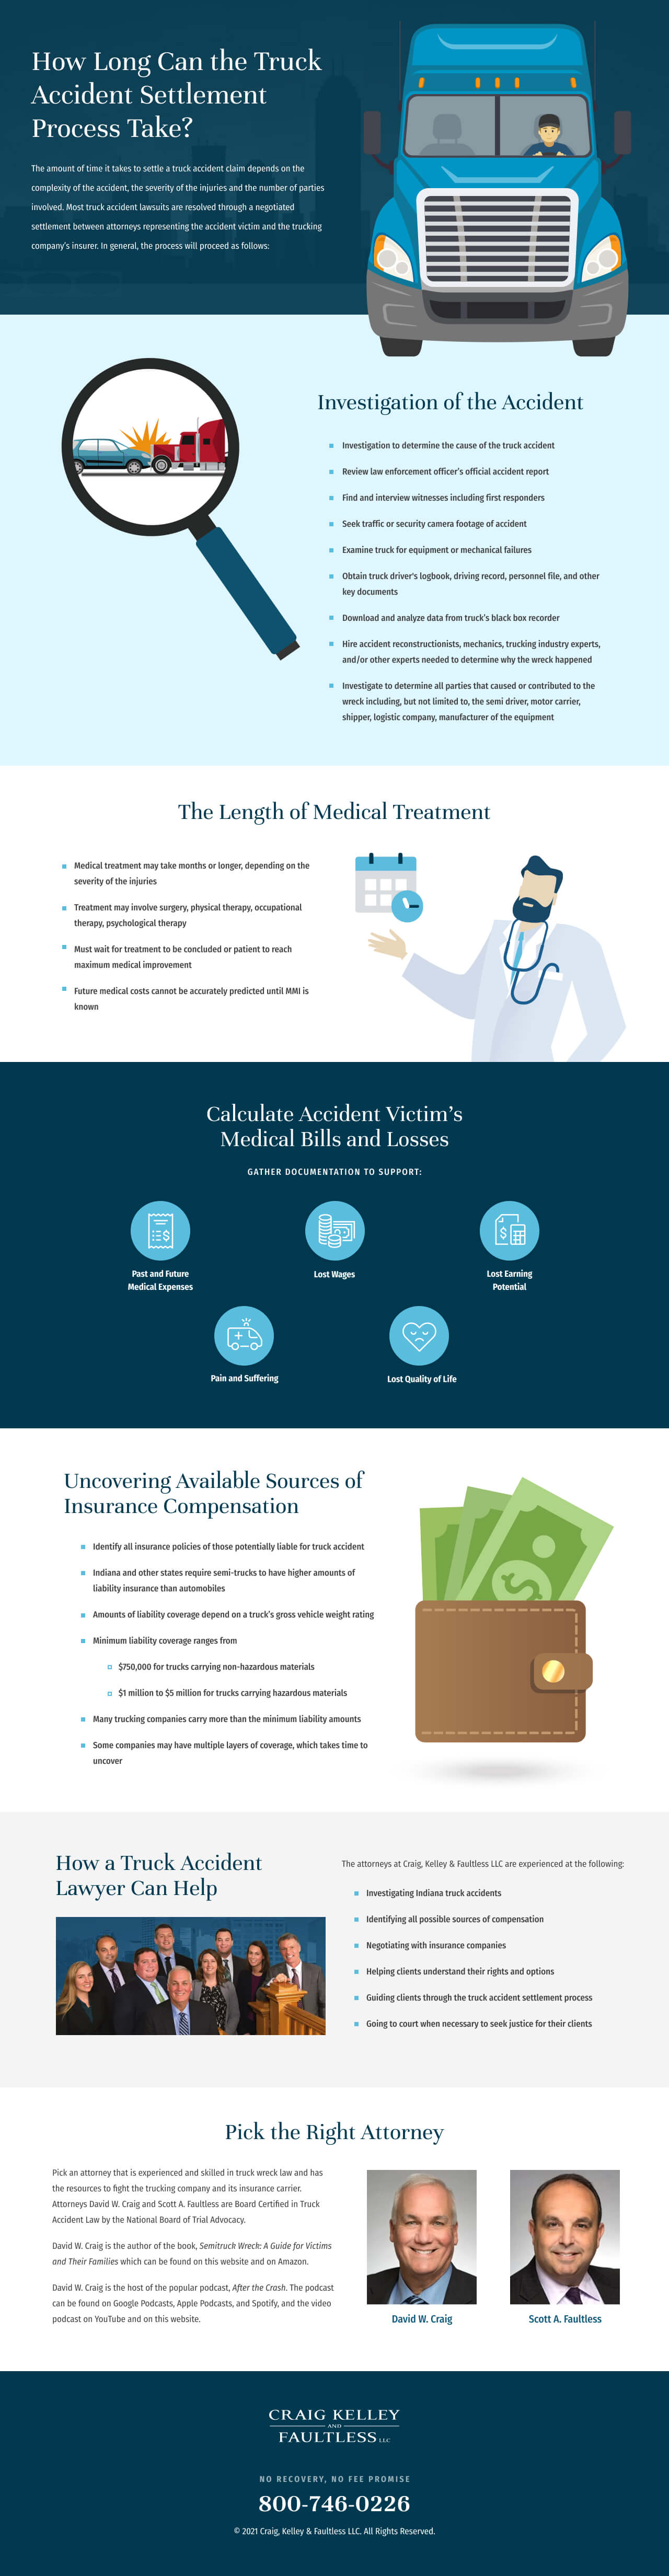 Truck Accident Settlement Infographic - CKF law